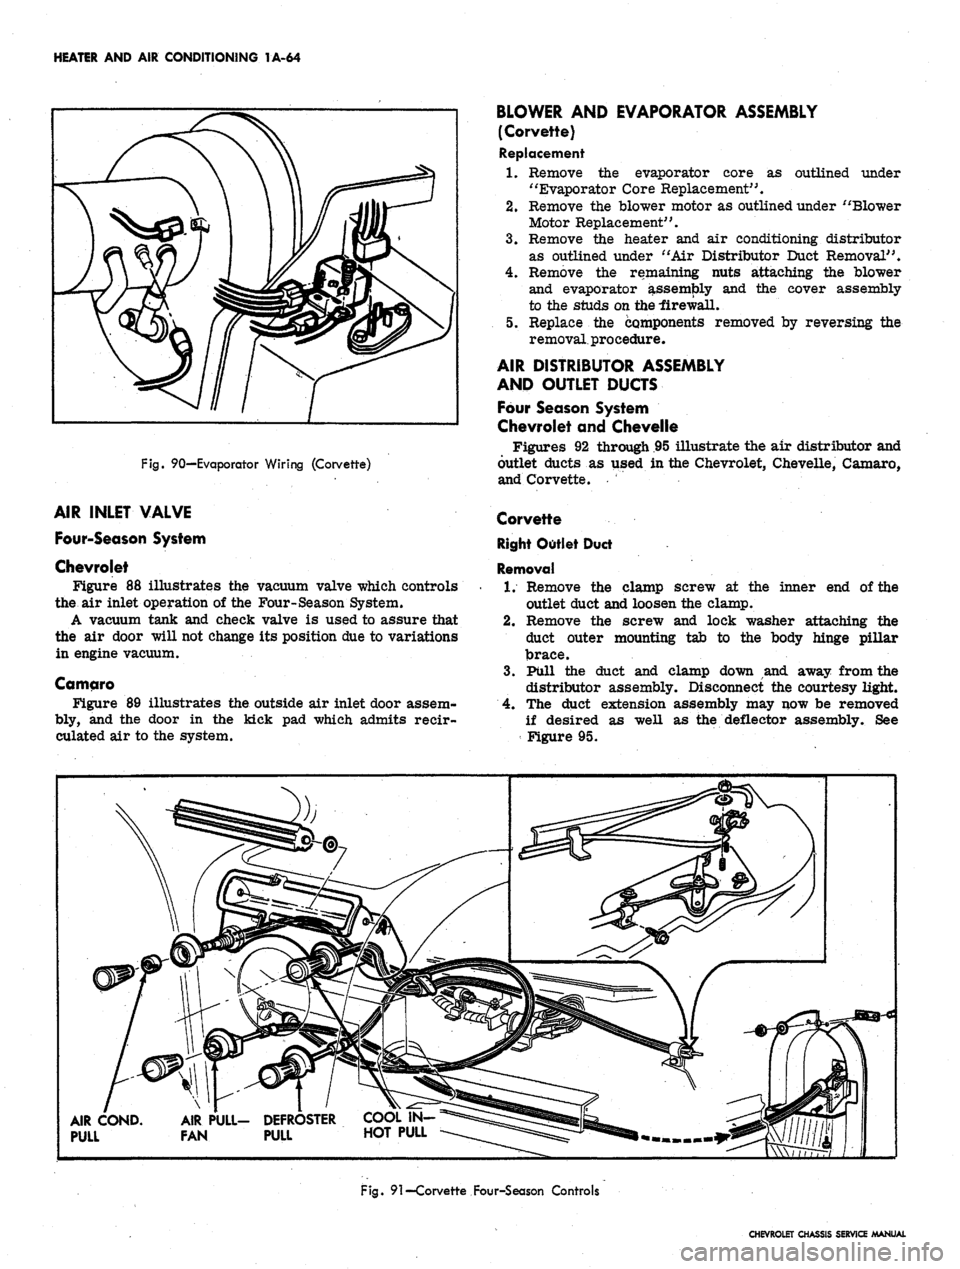 CHEVROLET CAMARO 1967 1.G Chassis Service Manual 
HEATER AND AIR CONDITIONING 1A-64

Fig.
 90—Evaporator Wiring (Corvette)

AIR INLET VALVE

Four-Season System

Chevrolet

Figure 88 illustrates the vacuum valve which controls

the air inlet operat